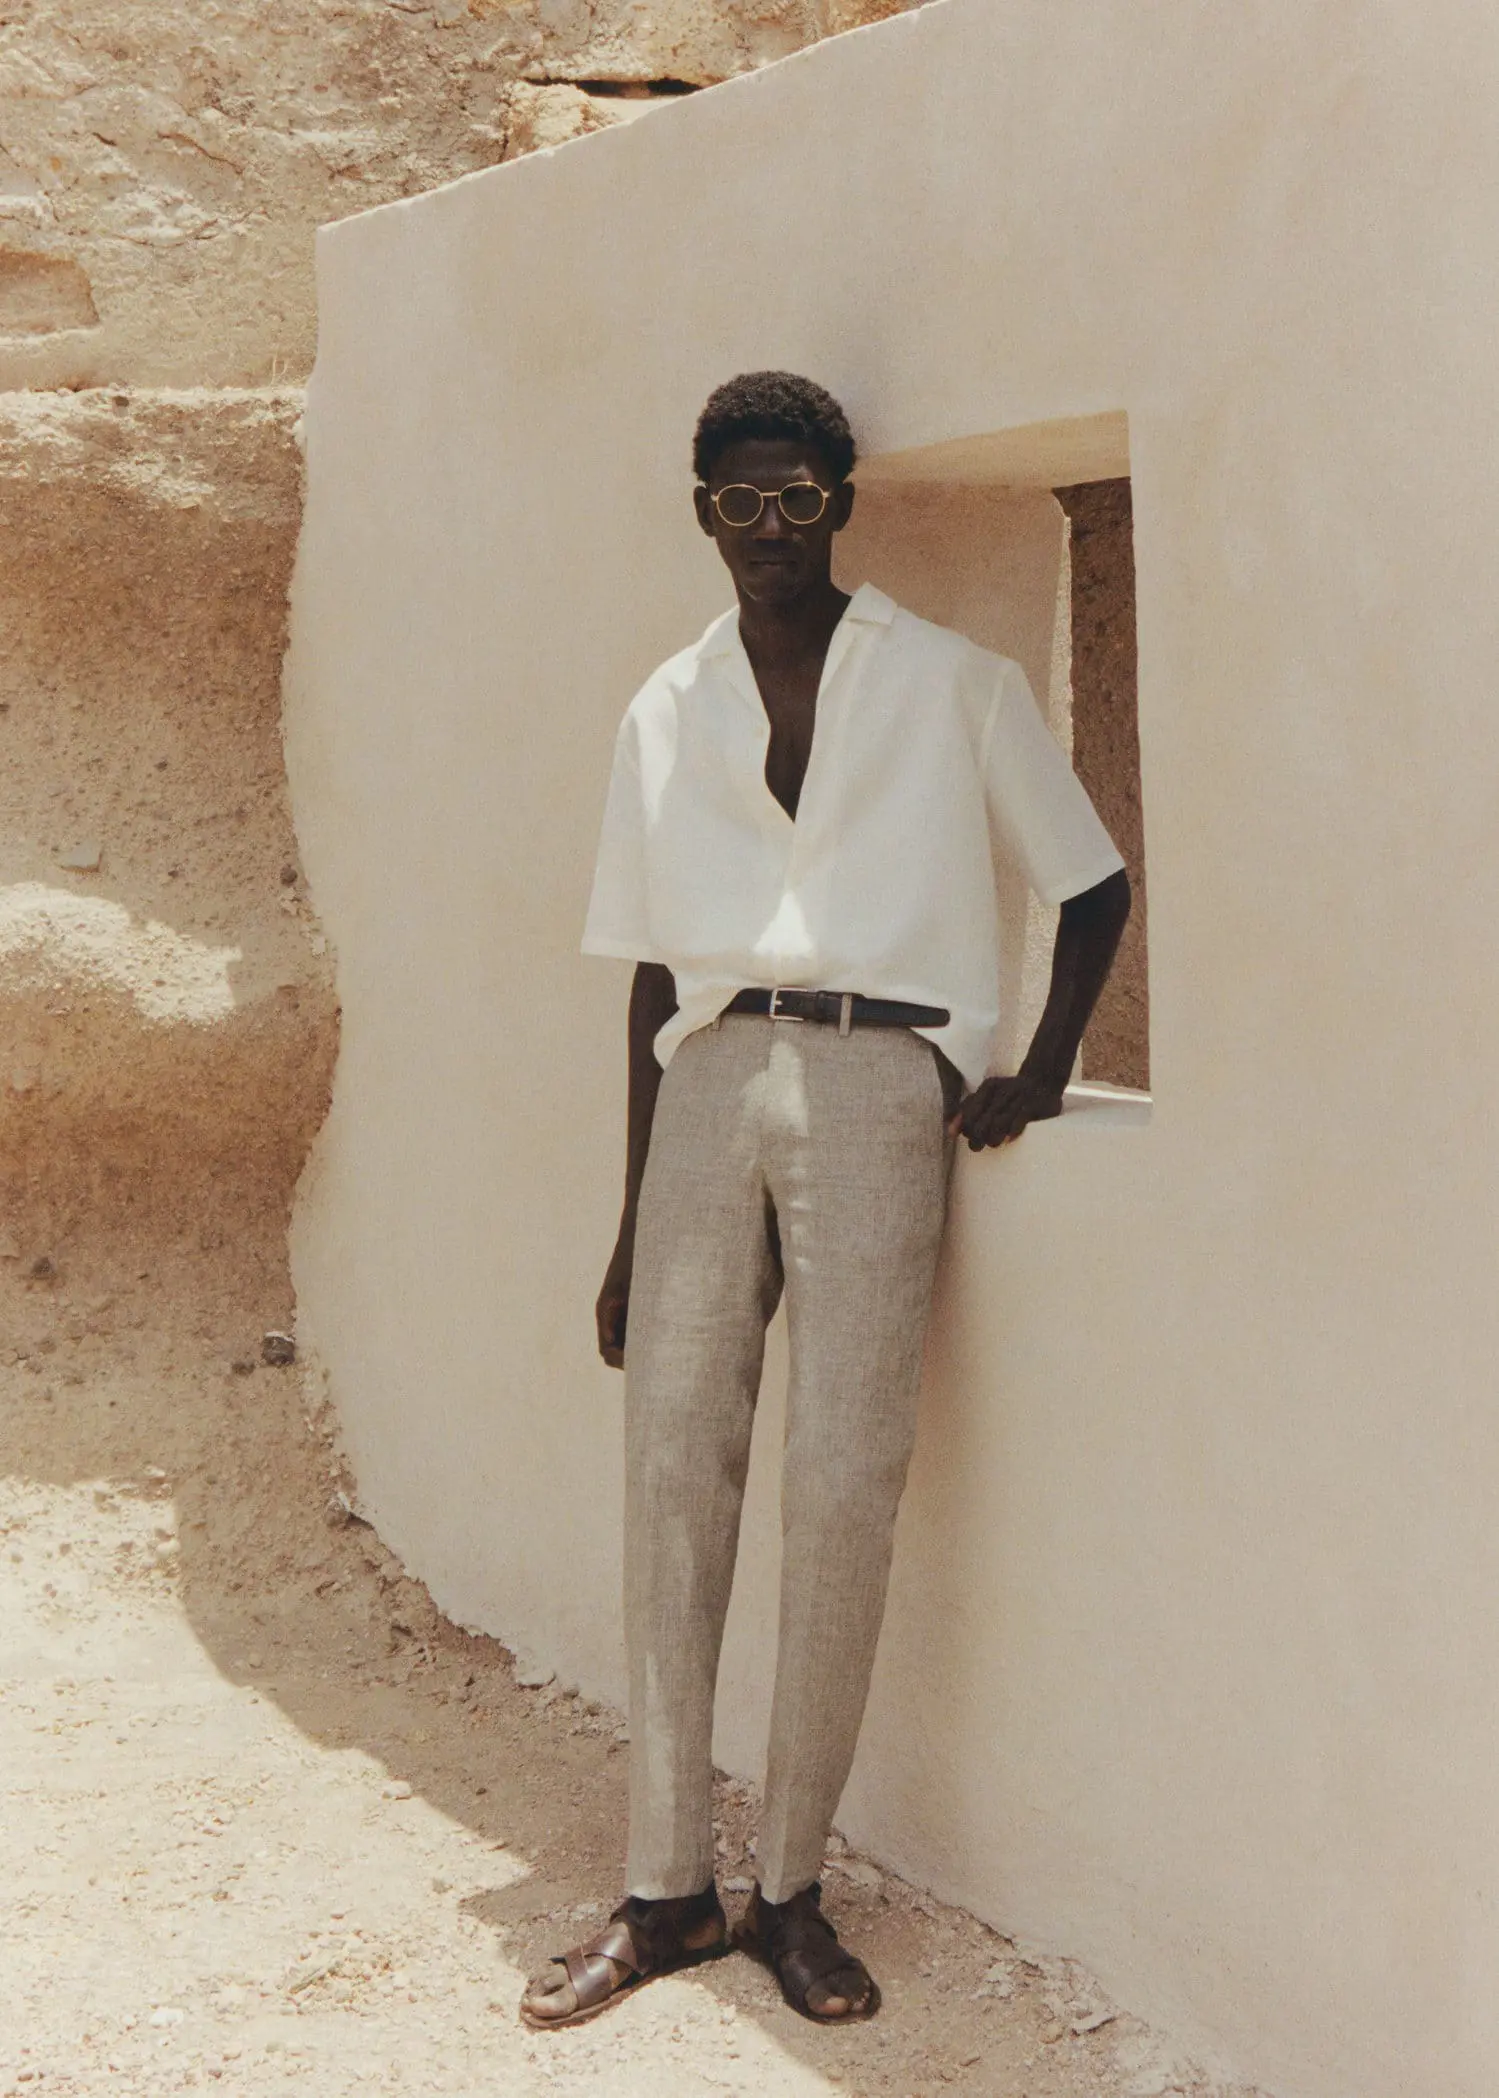 Mango 100% linen suit trousers. a man leaning up against a wall wearing sunglasses. 